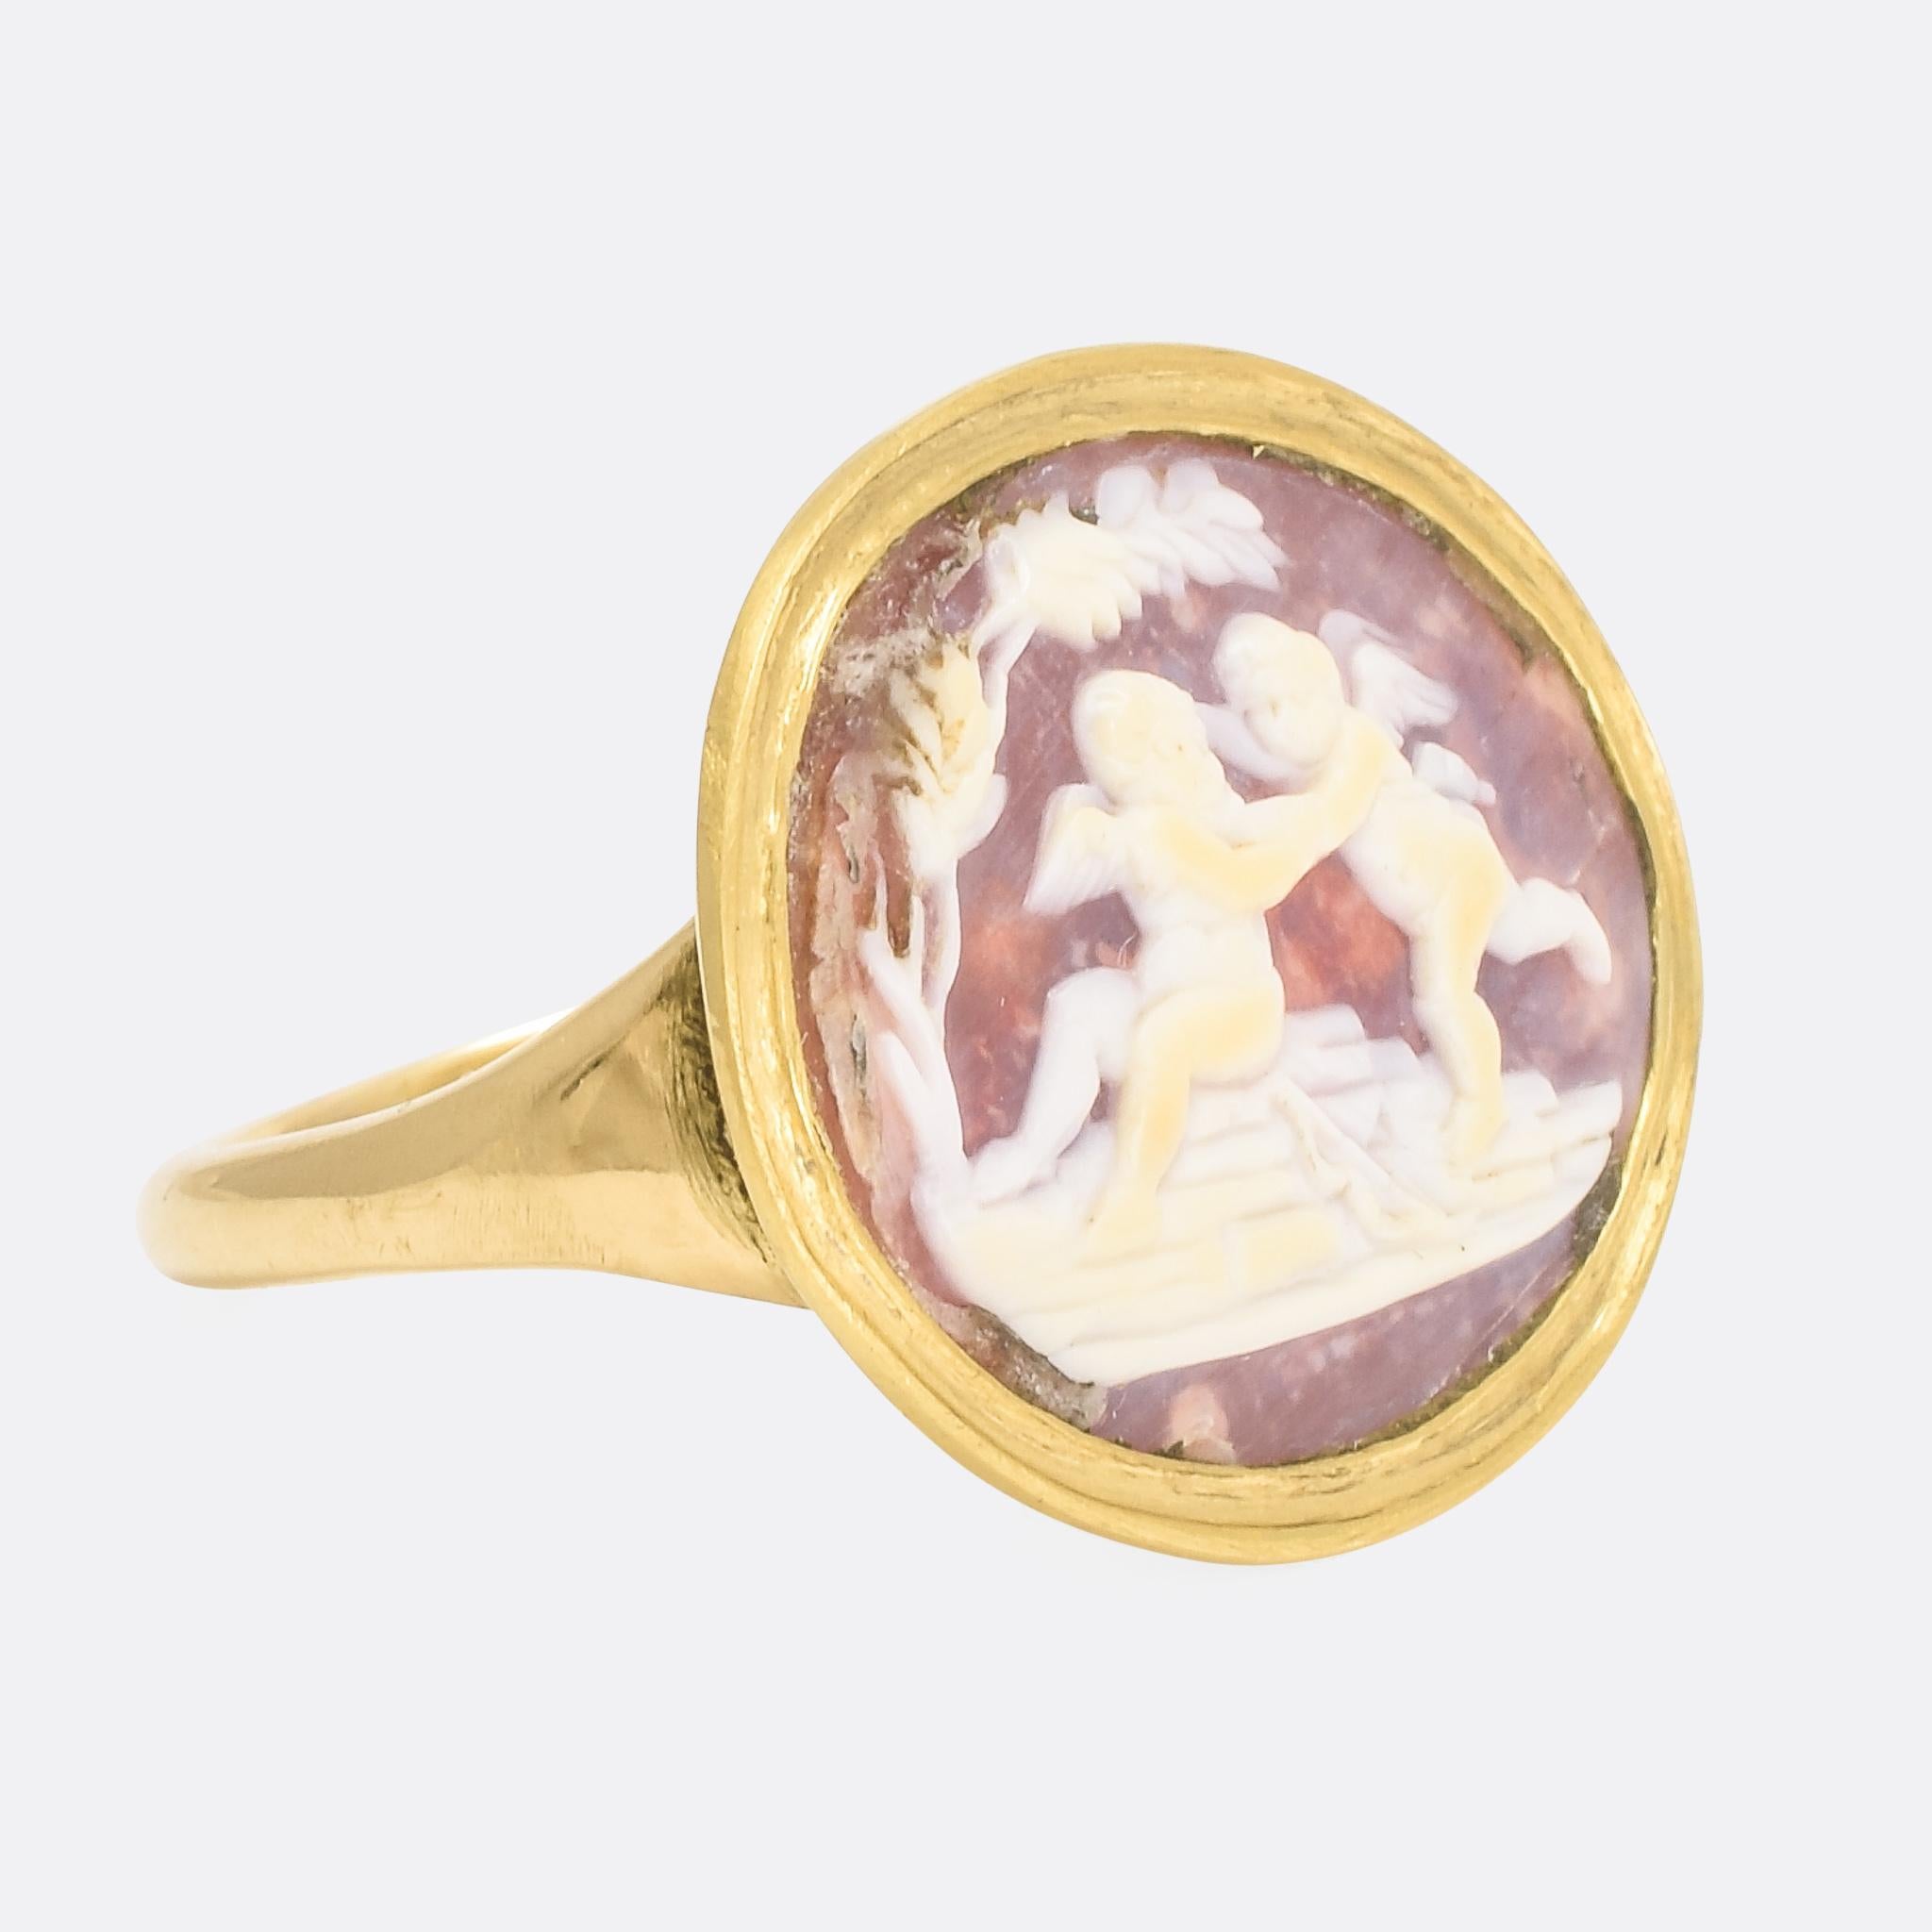 A fine Georgian cameo ring depicting two winged cherubs frolicking on a rock. The shell cameo is masterfully executed; it will have been carved in Italy, with great detail and perfect contrast between the subject and background. The ring itself was